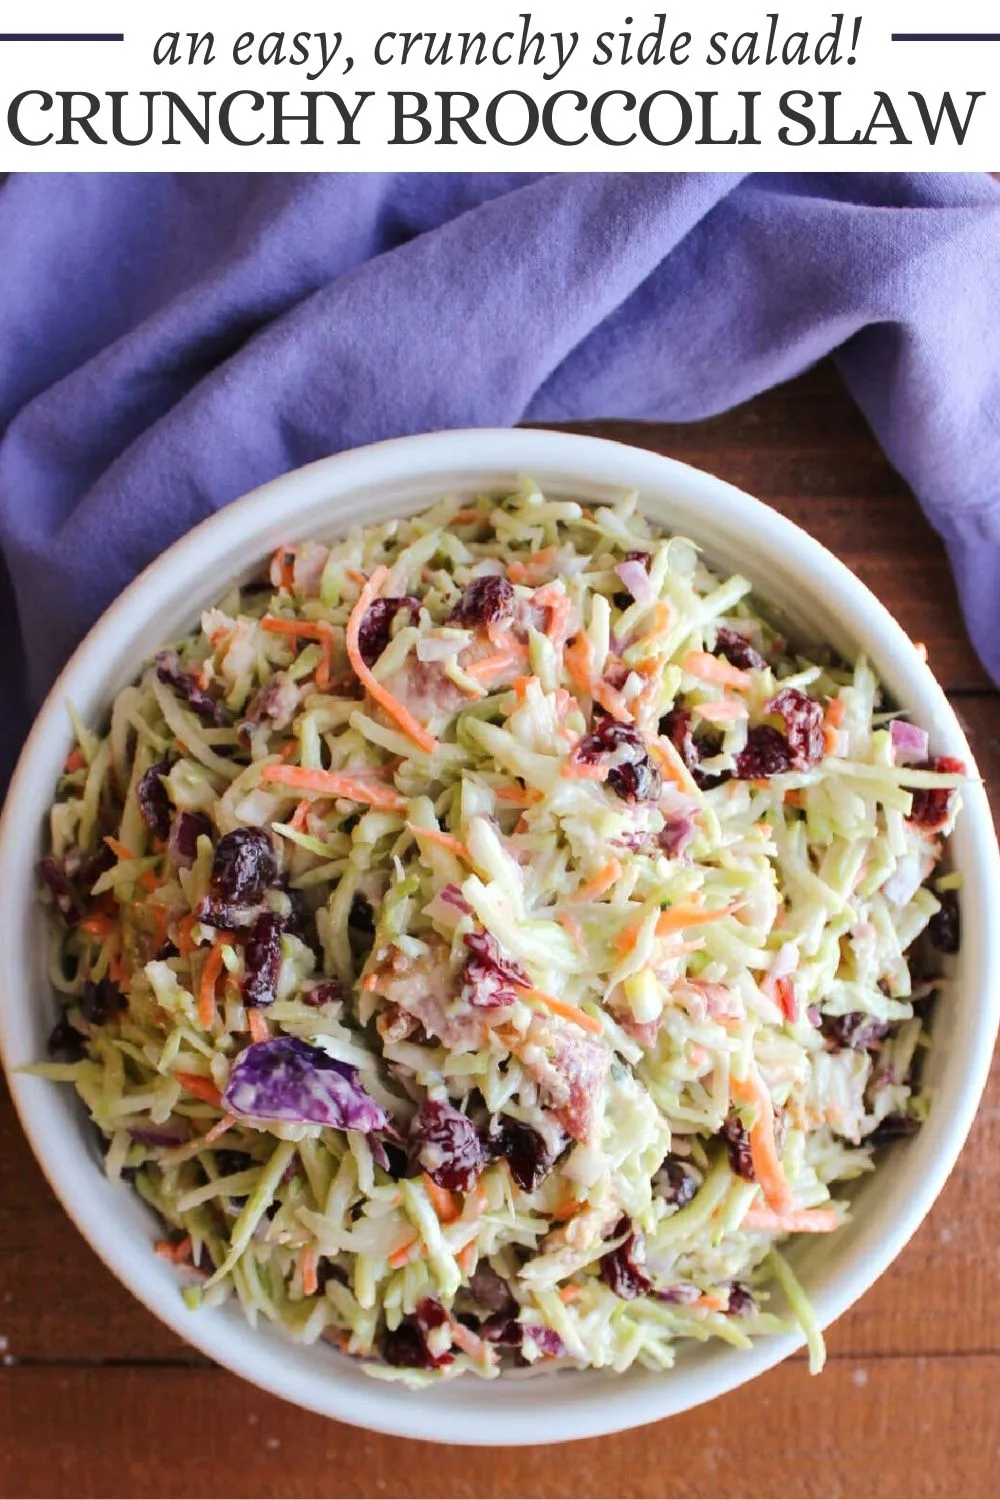 If you love crunchy broccoli salad, you are going to love this broccoli slaw. It has all of the flavors you love with a slightly sweet dressing, dried cranberries and bacon but in a lower prep and easier to eat form.